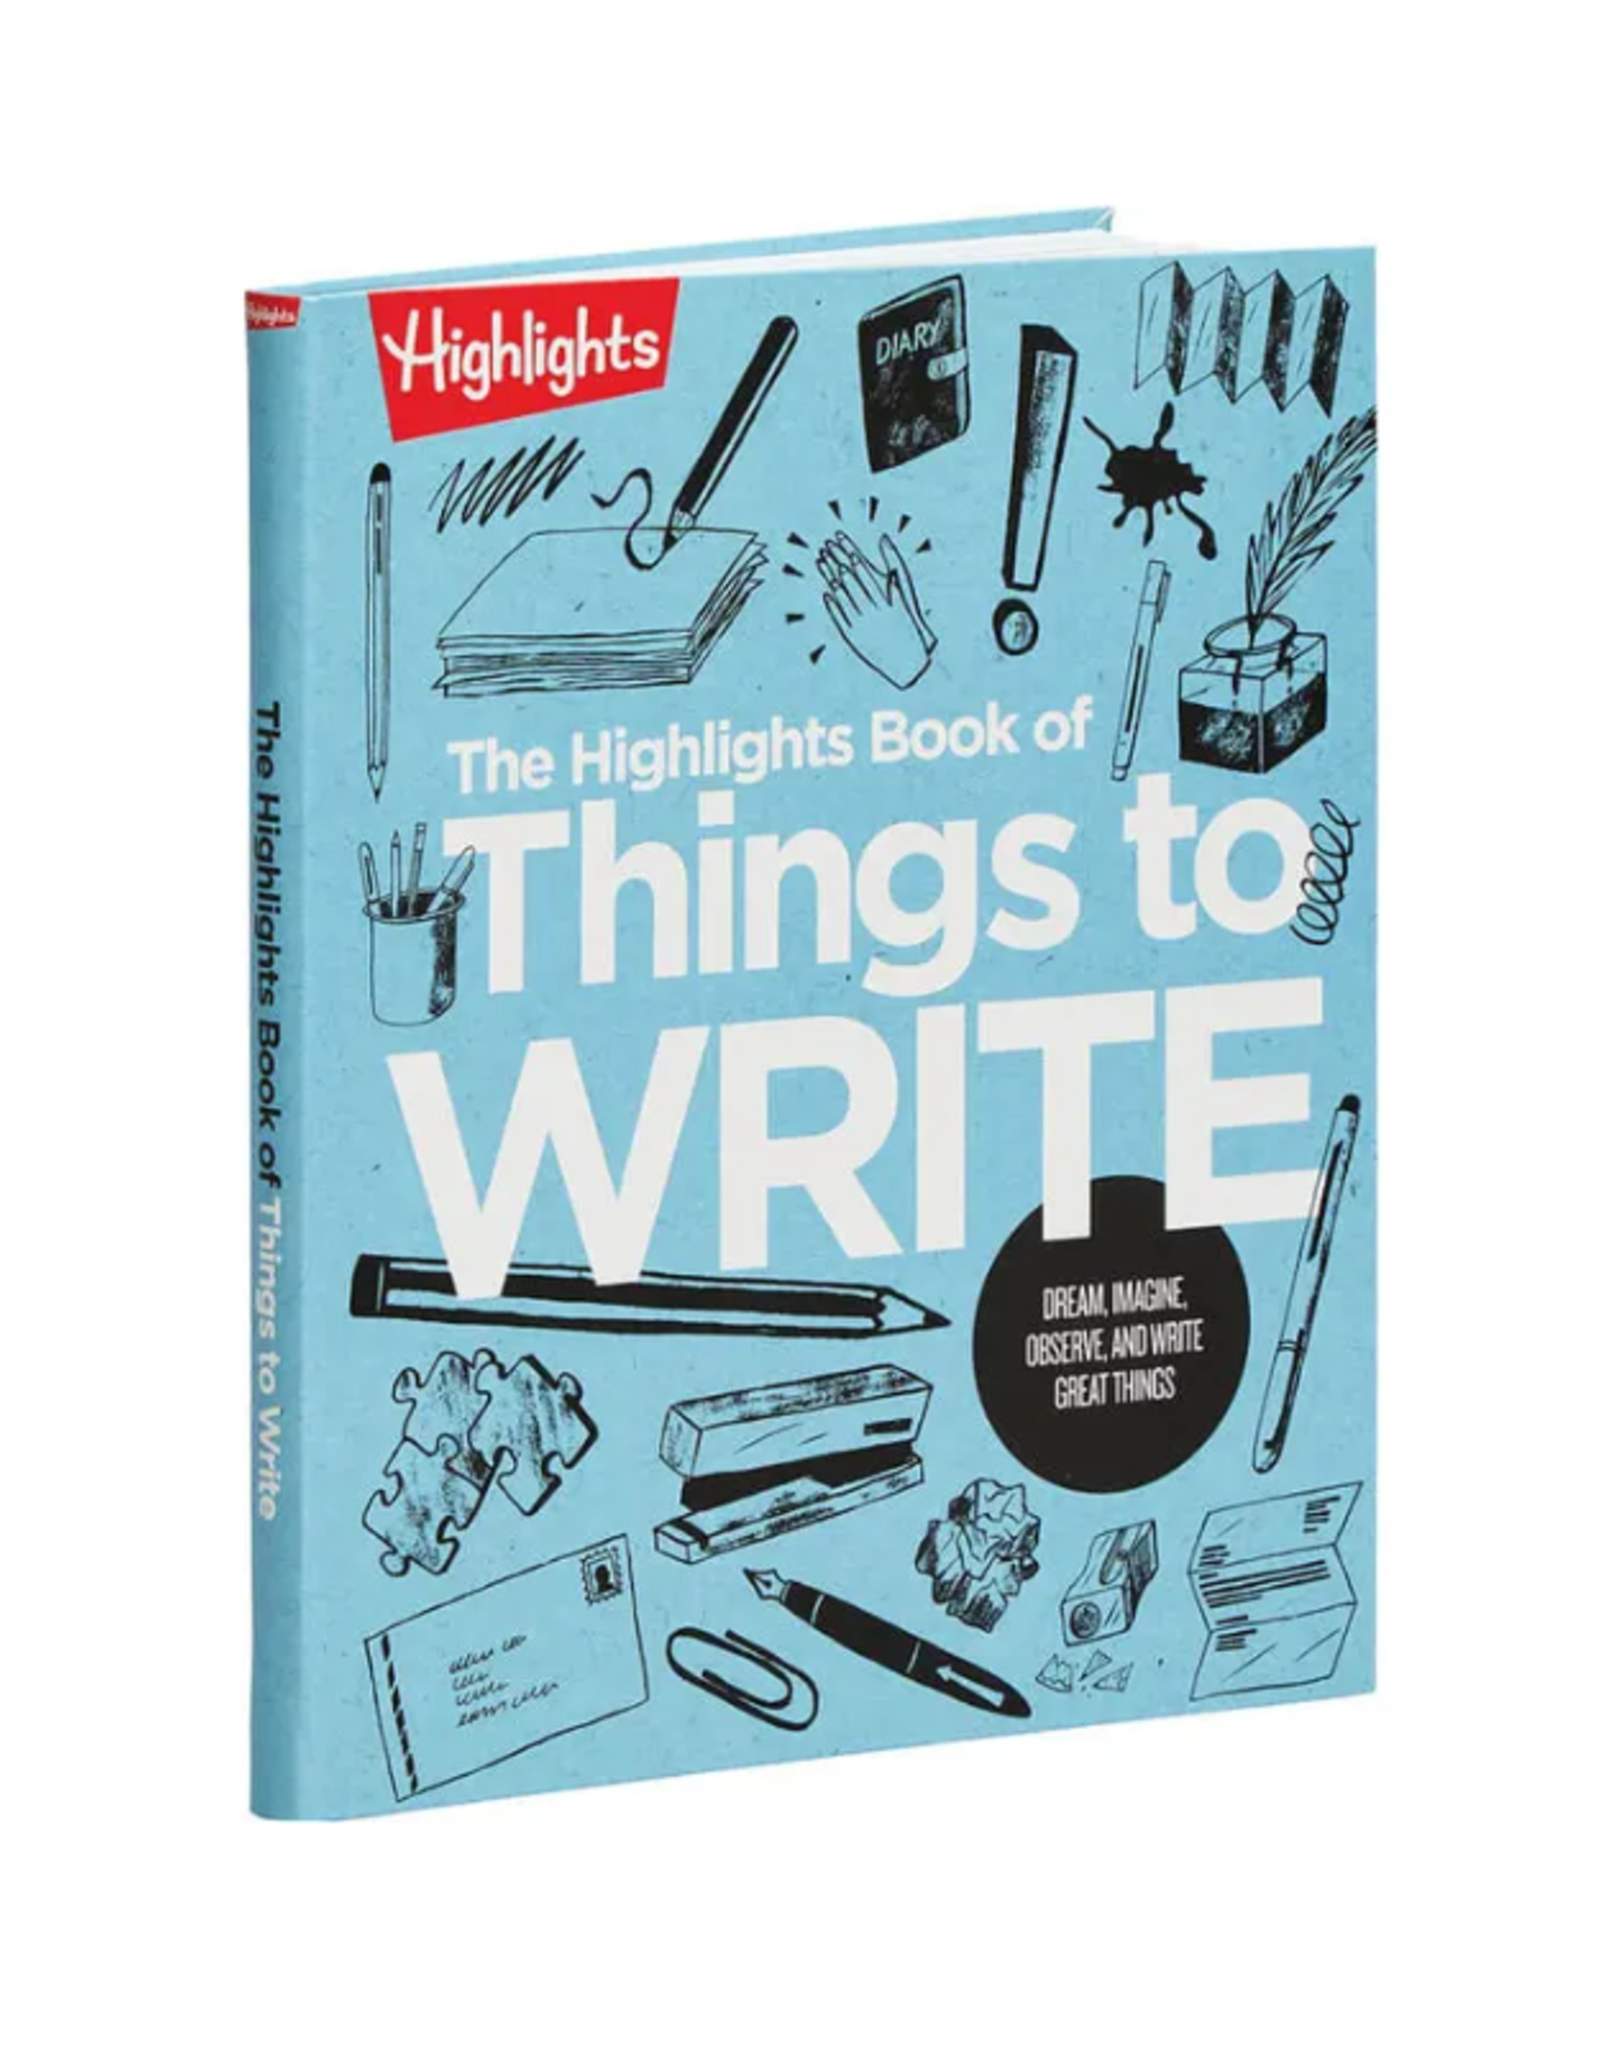 The Highlights Book of Things to Write